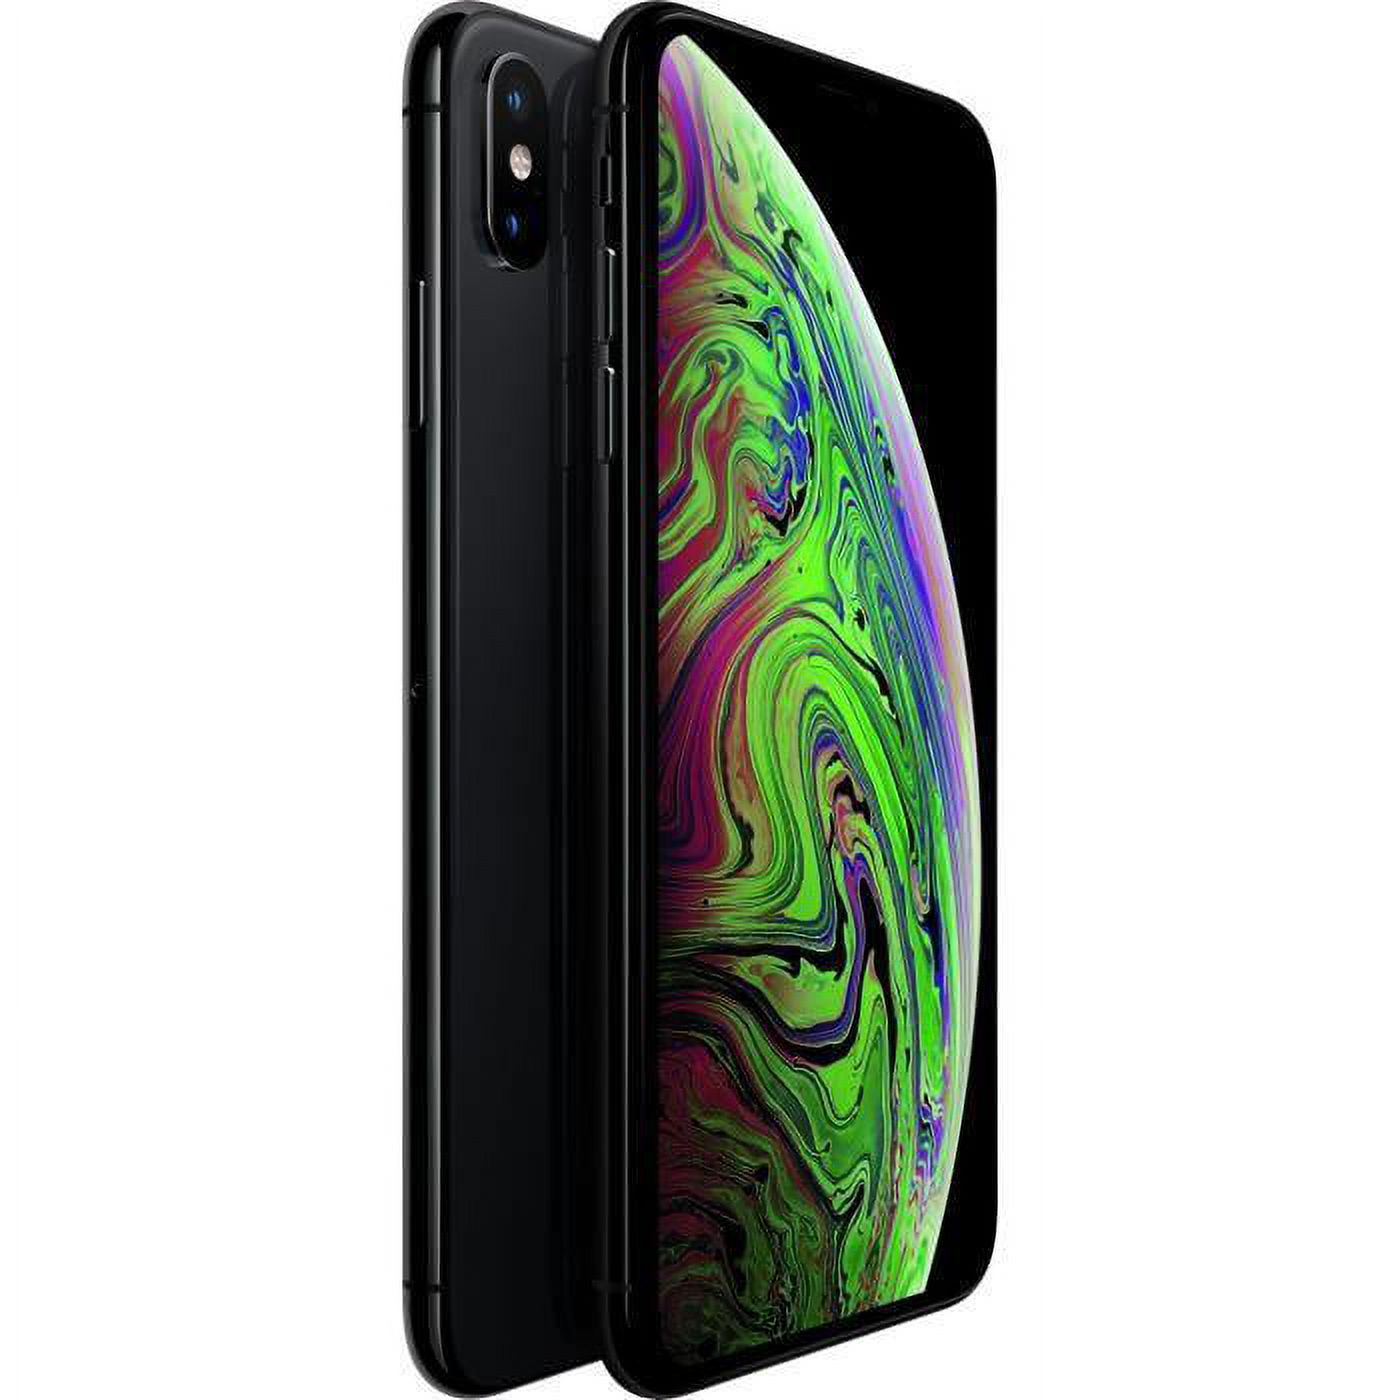 Pre-Owned Apple iPhone XS Max Fully Unlocked, Space Gray 256gb (Refurbished: Fair) - image 3 of 5